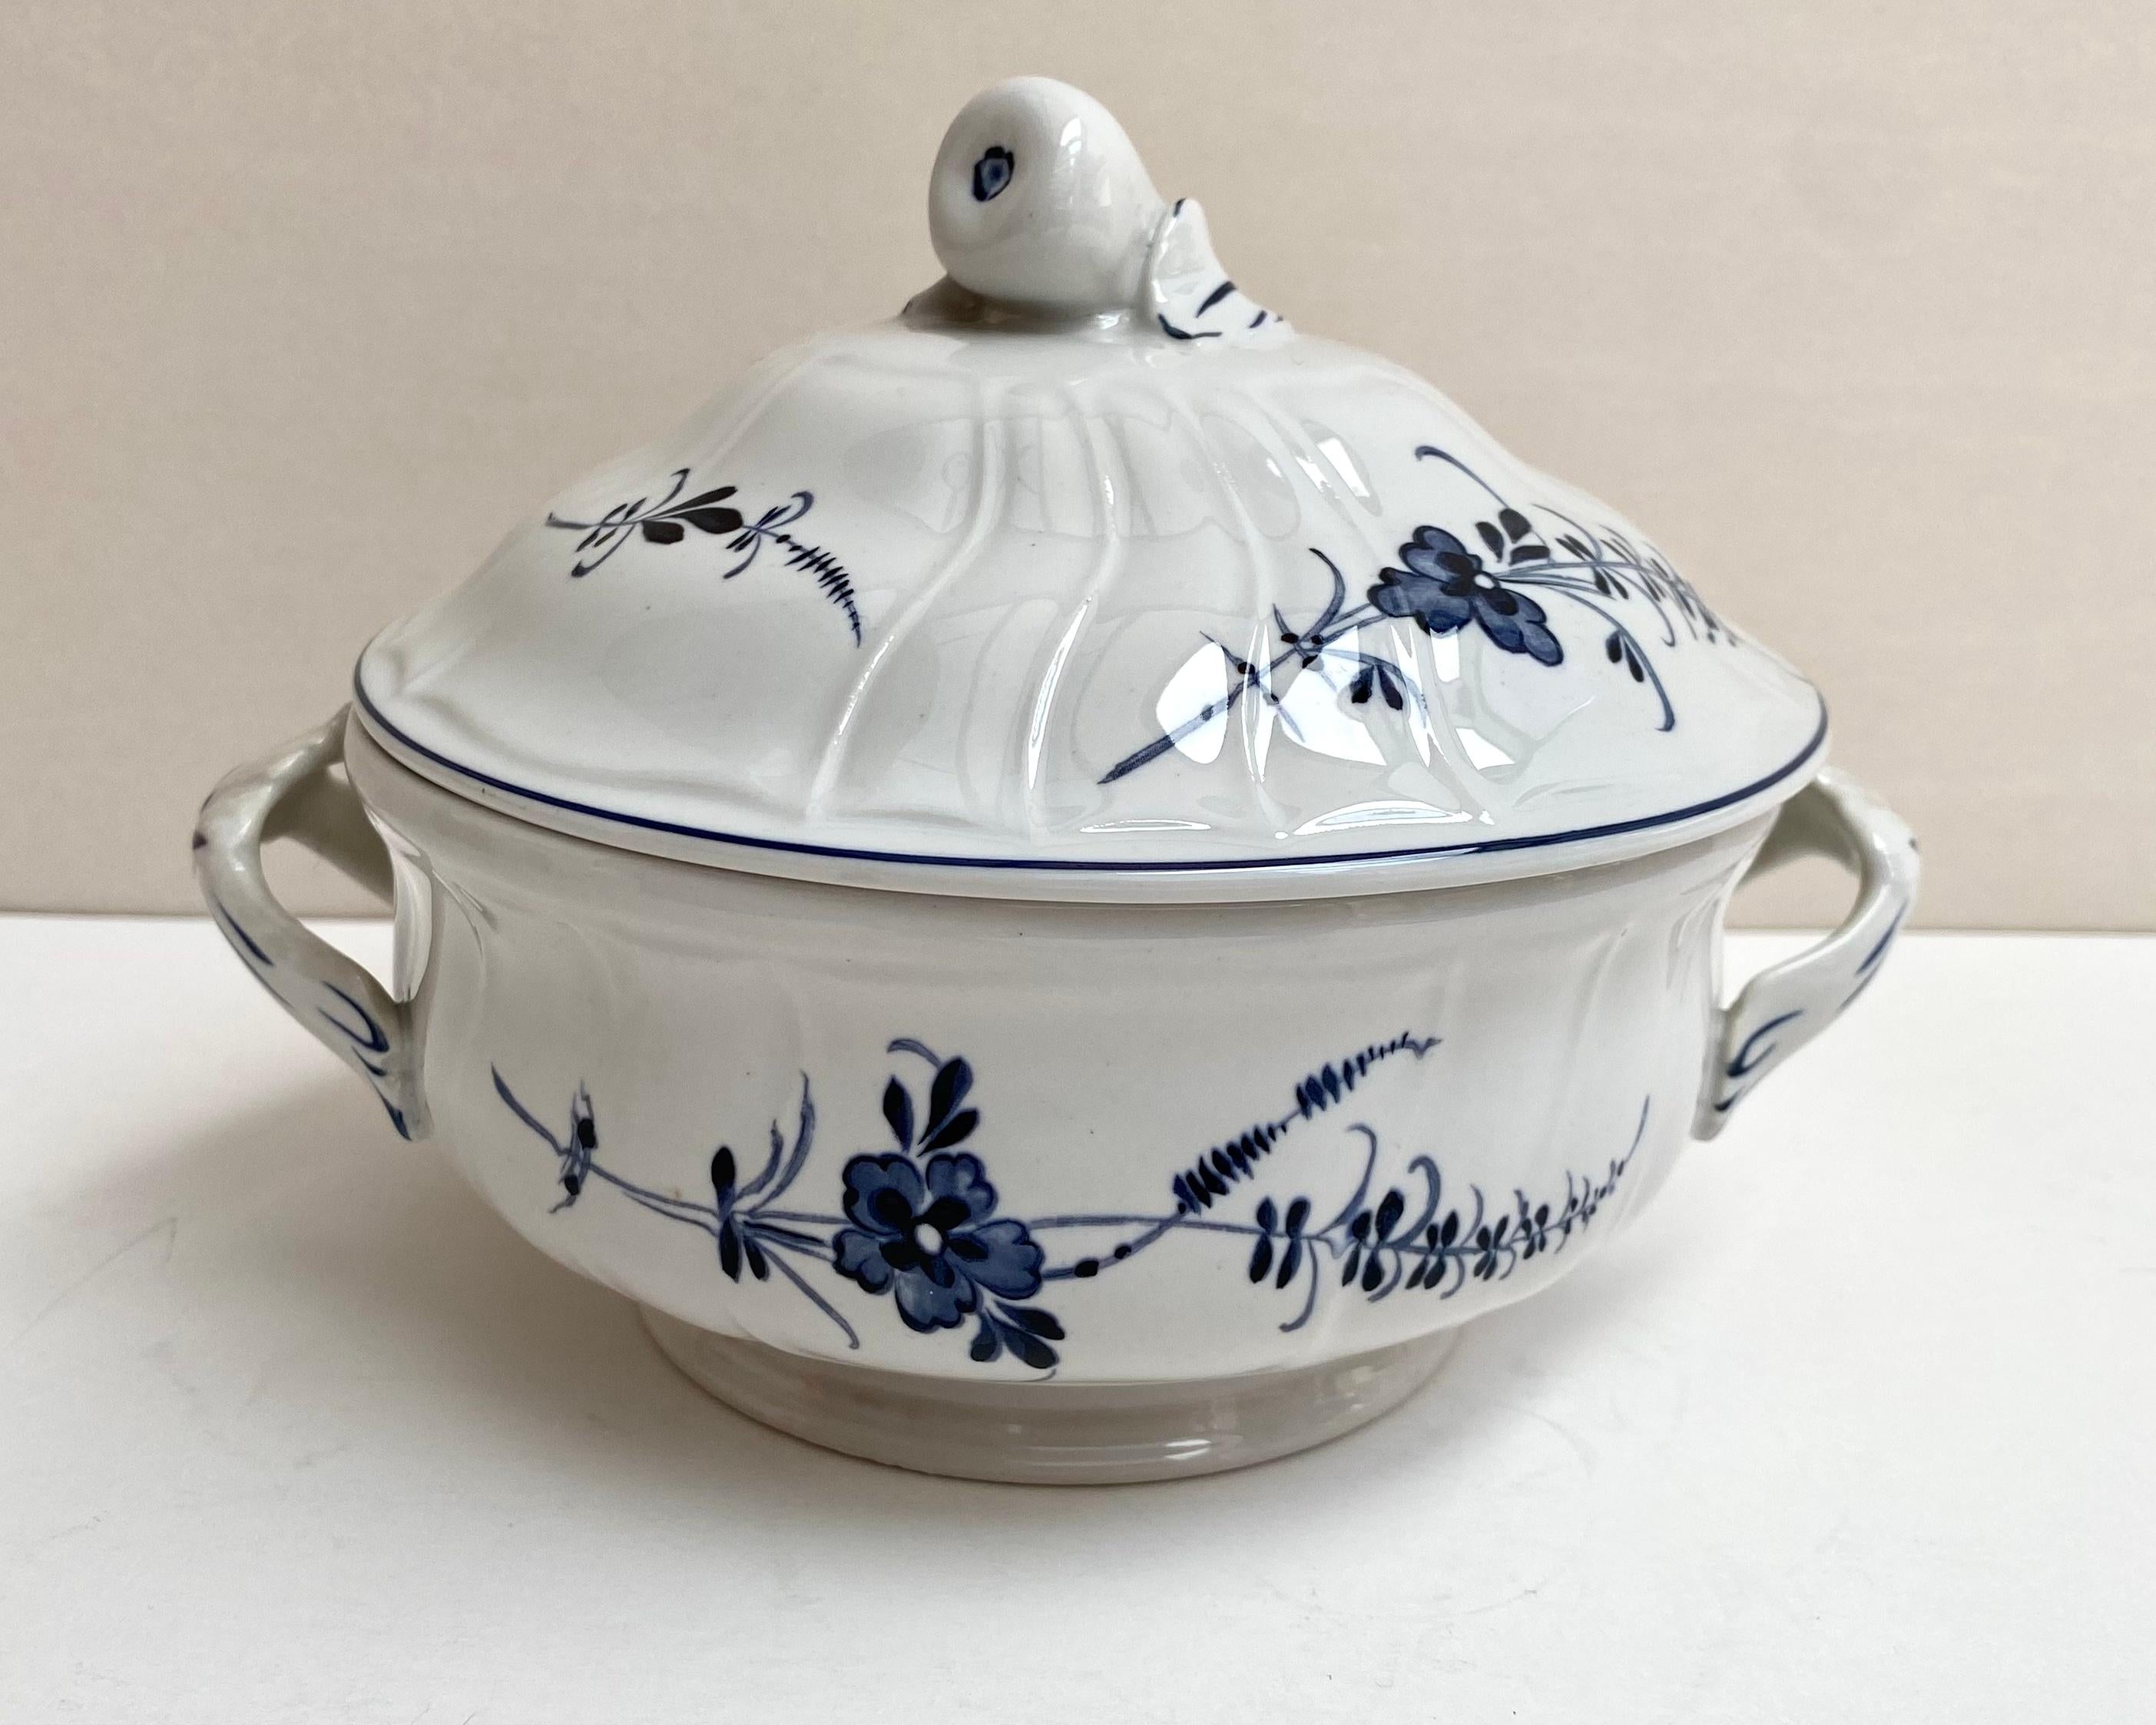 We offer a porcelain candy bowl from the Vieux Luxemburg series from the cult manufacturer Villeroy and Boch, which is in high demand among customers, grace and elegance are perfectly reflected in this series.

Its incredible blue hand-painted